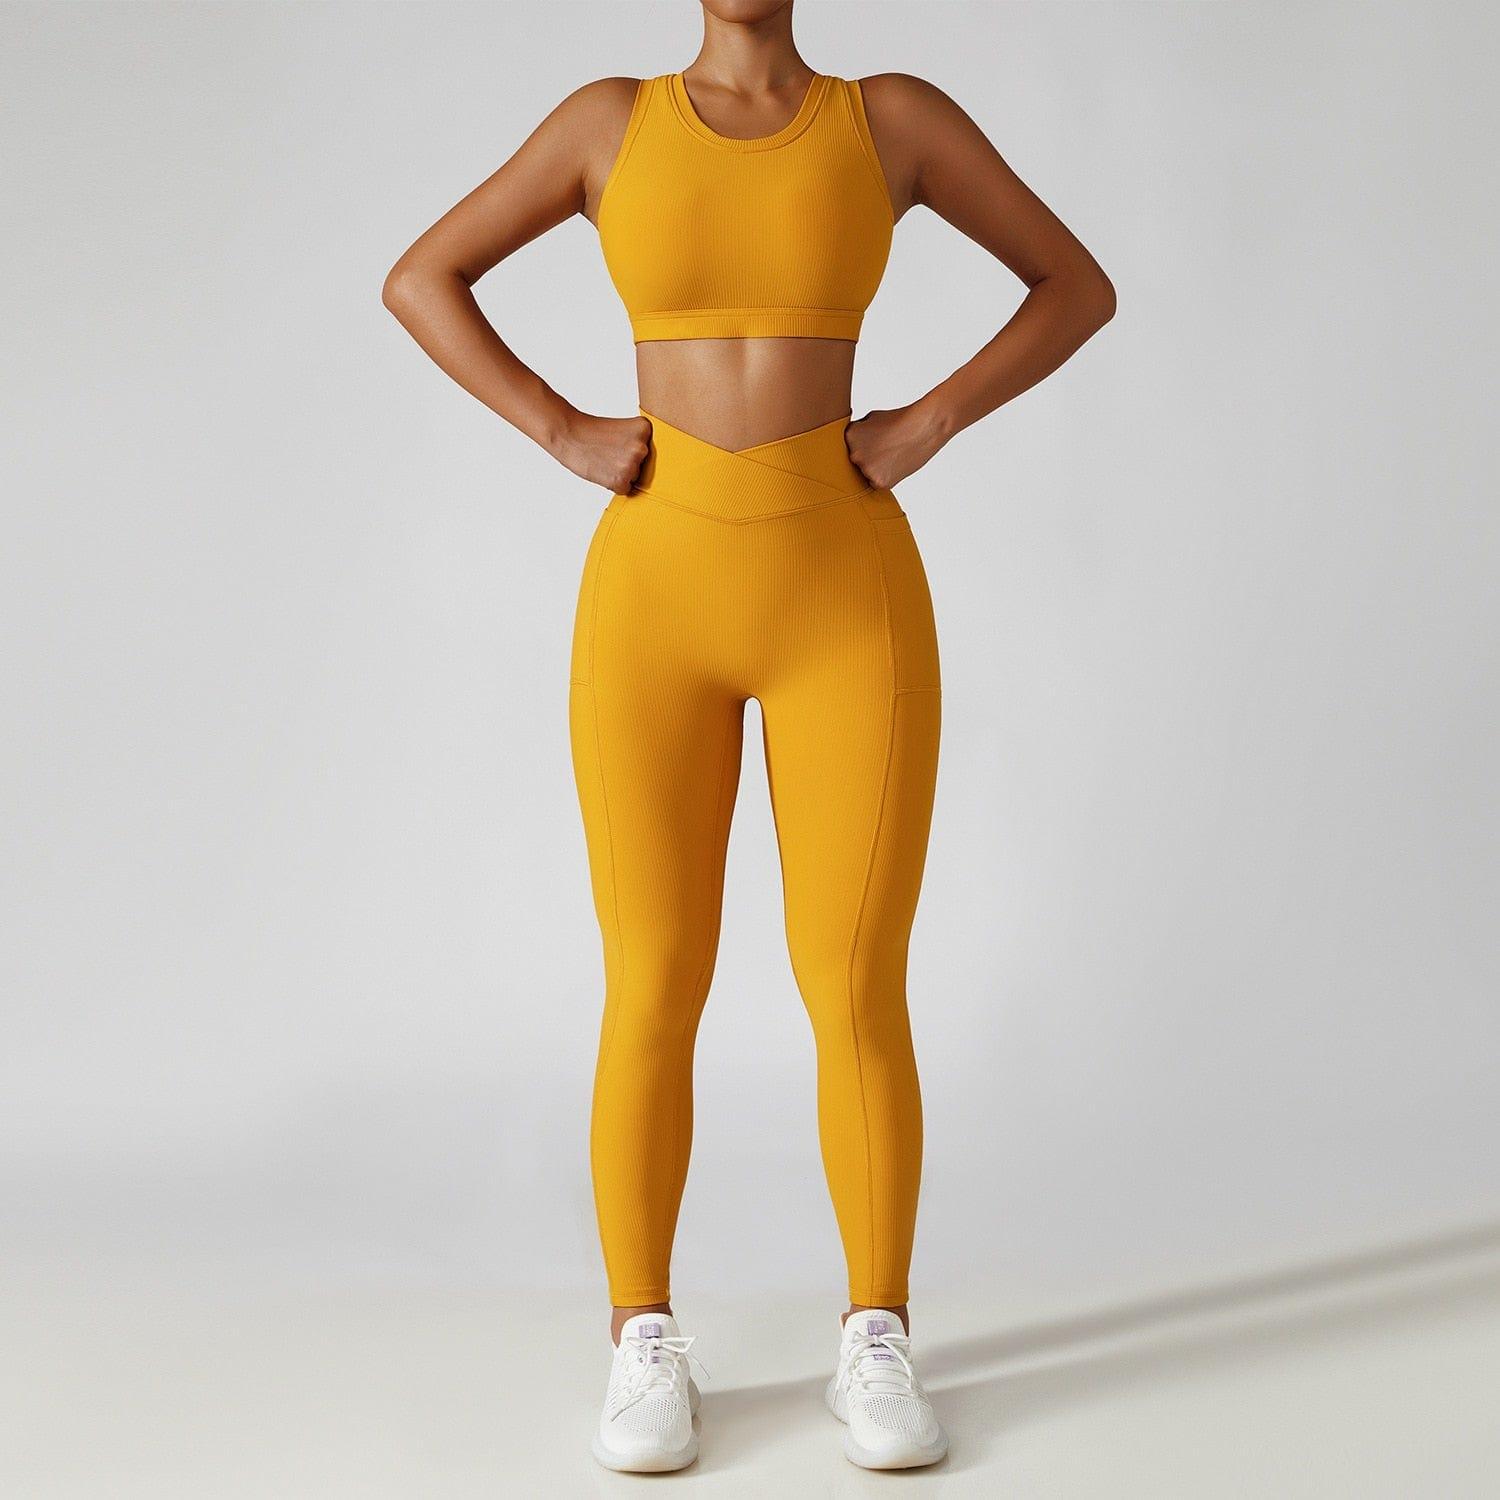 Shop 0 Yellow suit-4 / S / China 2 Pieces Seamless Women Tracksuit  Yoga Set Running Workout Sportswear Gym Clothes Fitness Bra High Waist Leggings Sports Suit Mademoiselle Home Decor